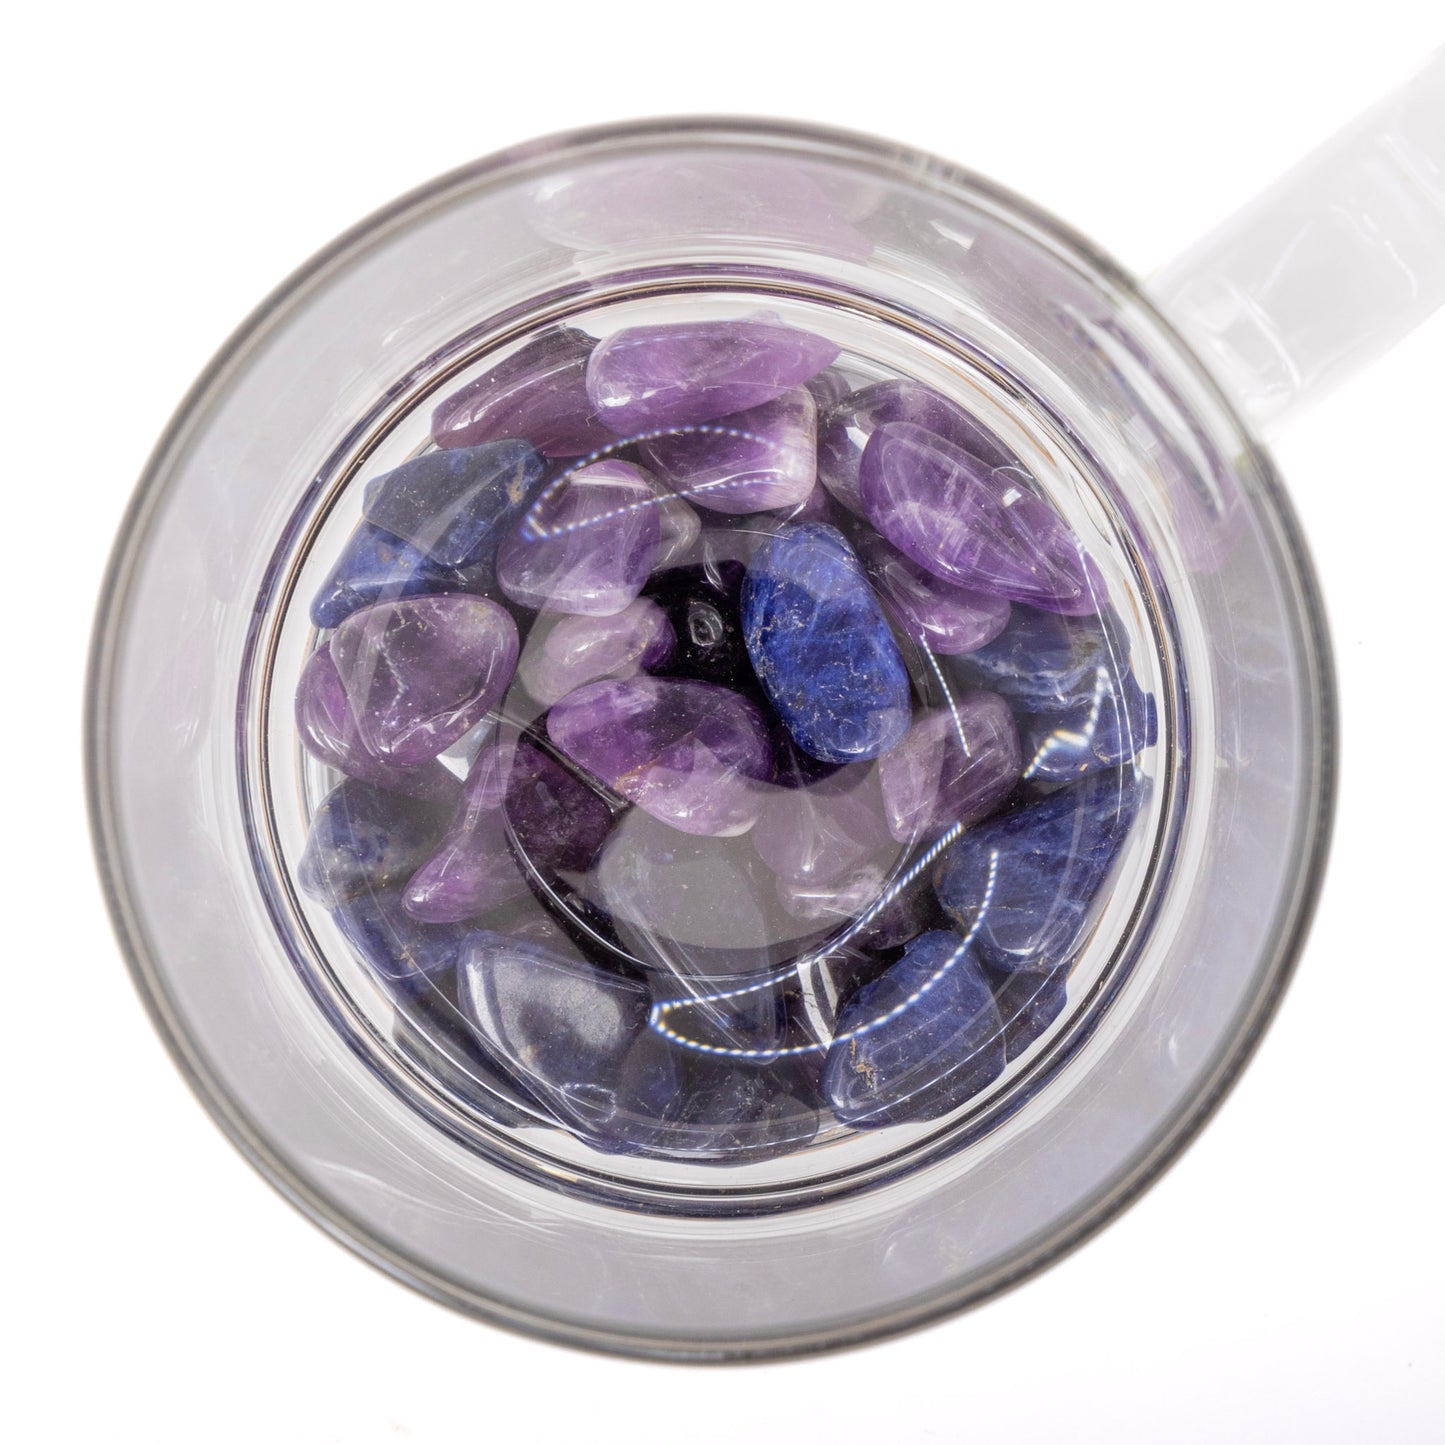 Crystal Mug for Trust + Guidance with Amethyst and Sodalite Crystals